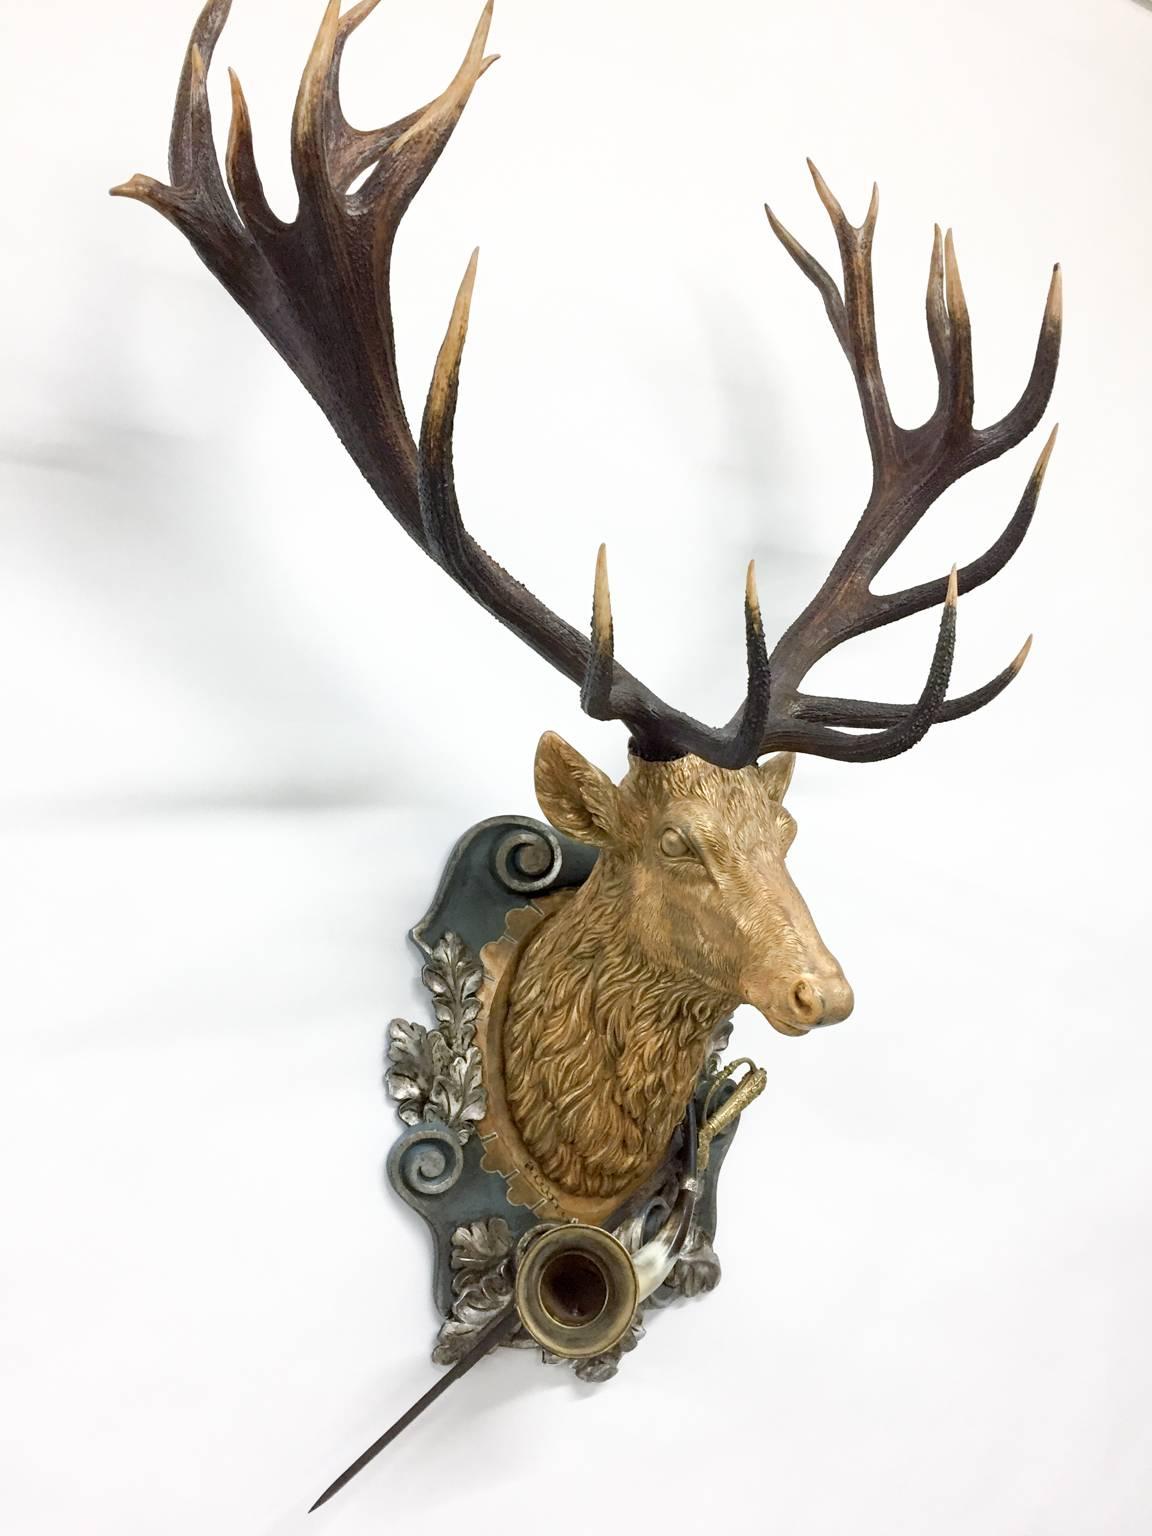 19th century red stag trophy originally from Emperor Franz Joseph's castle in Eckartsau in the Southern Austrian Alps. The red stag carving itself is a newly carved red stag with the 19th century Habsburg/Eckartsau antlers. The head and plaque are